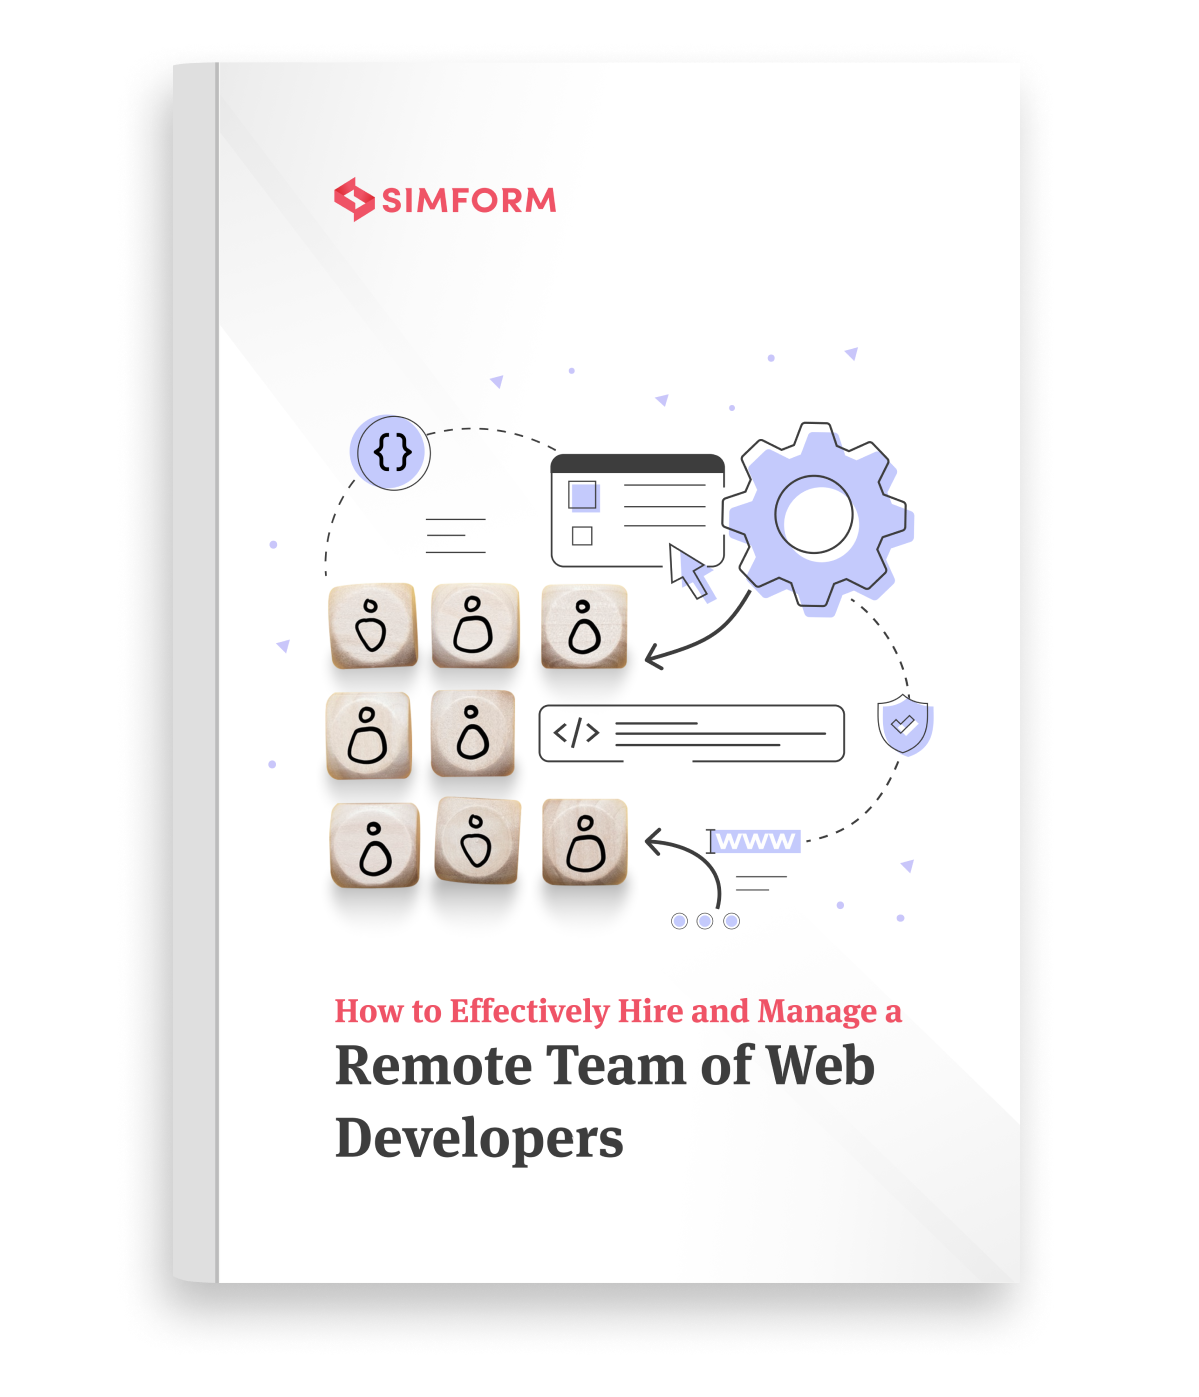 Hiring remote team of developers